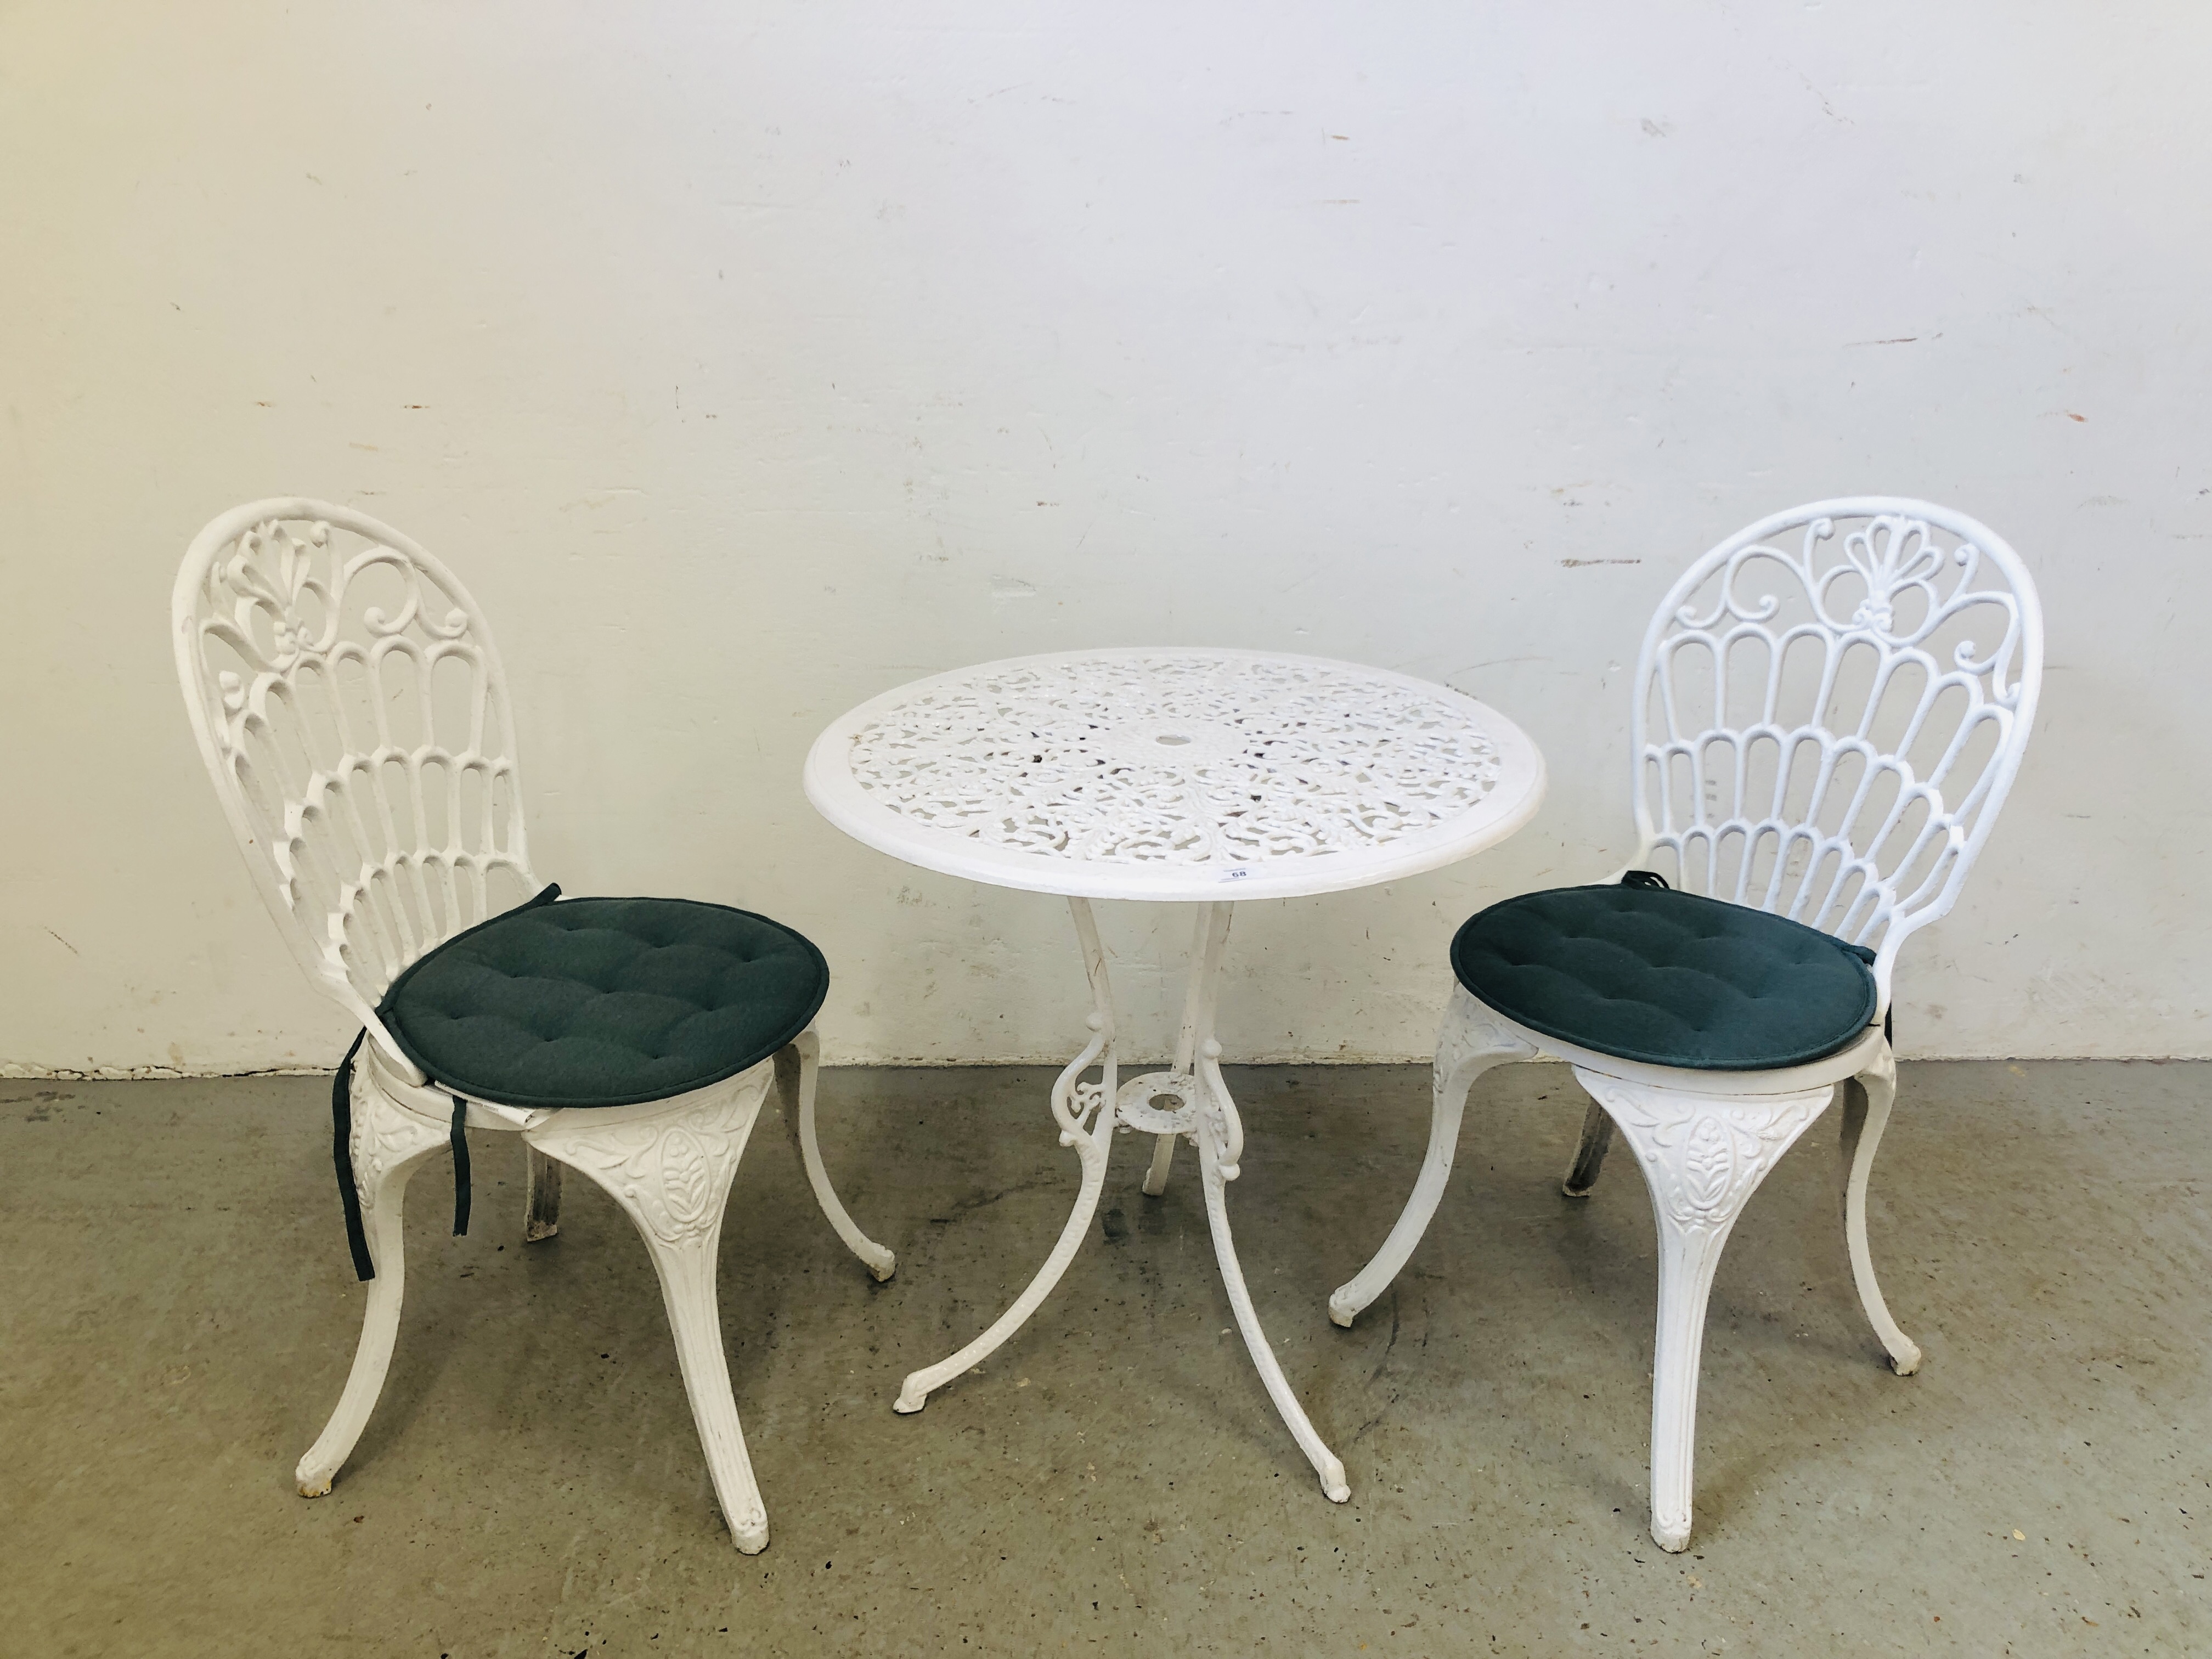 A WHITE FINISH CAST METAL BISTRO SET COMPRISING OF CIRCULAR TABLE AND 2 CHAIRS - Image 6 of 6